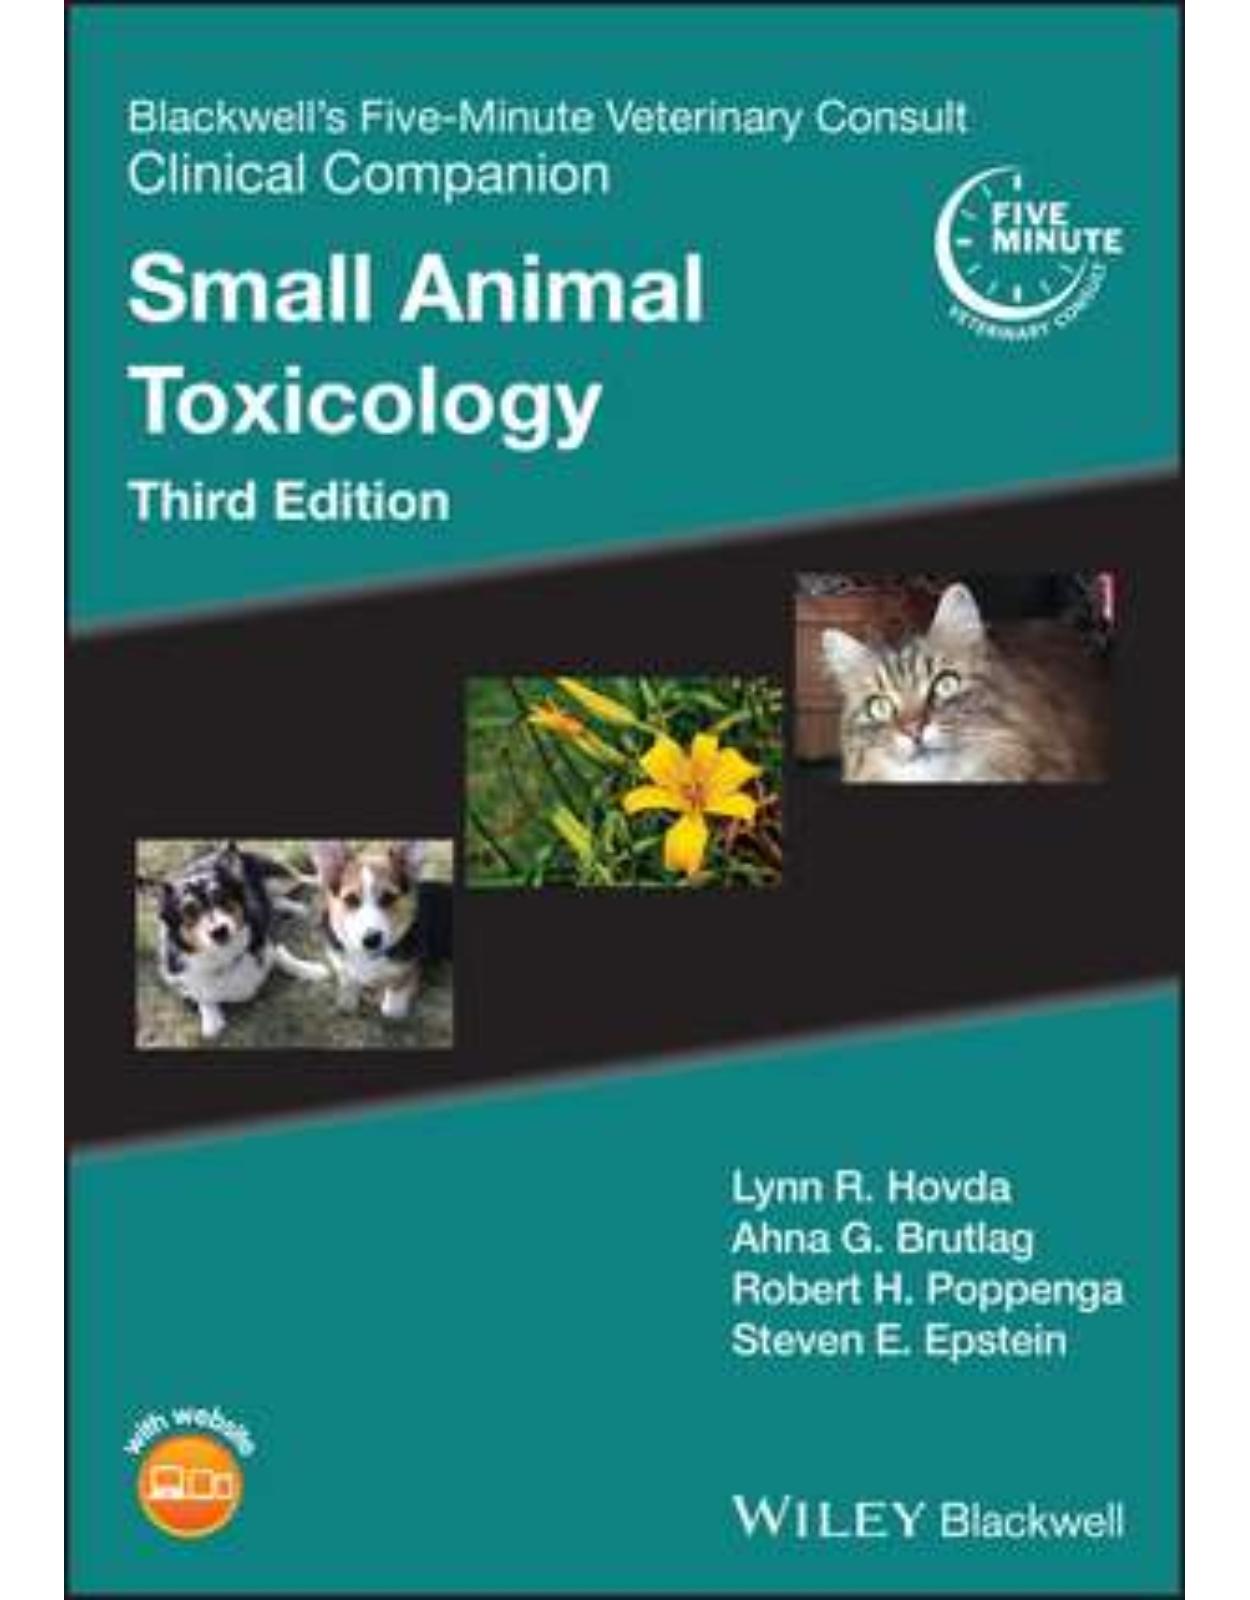 Blackwell’s Five-Minute Veterinary Consult Clinical Companion: Small Animal Toxicology, 3rd Edition